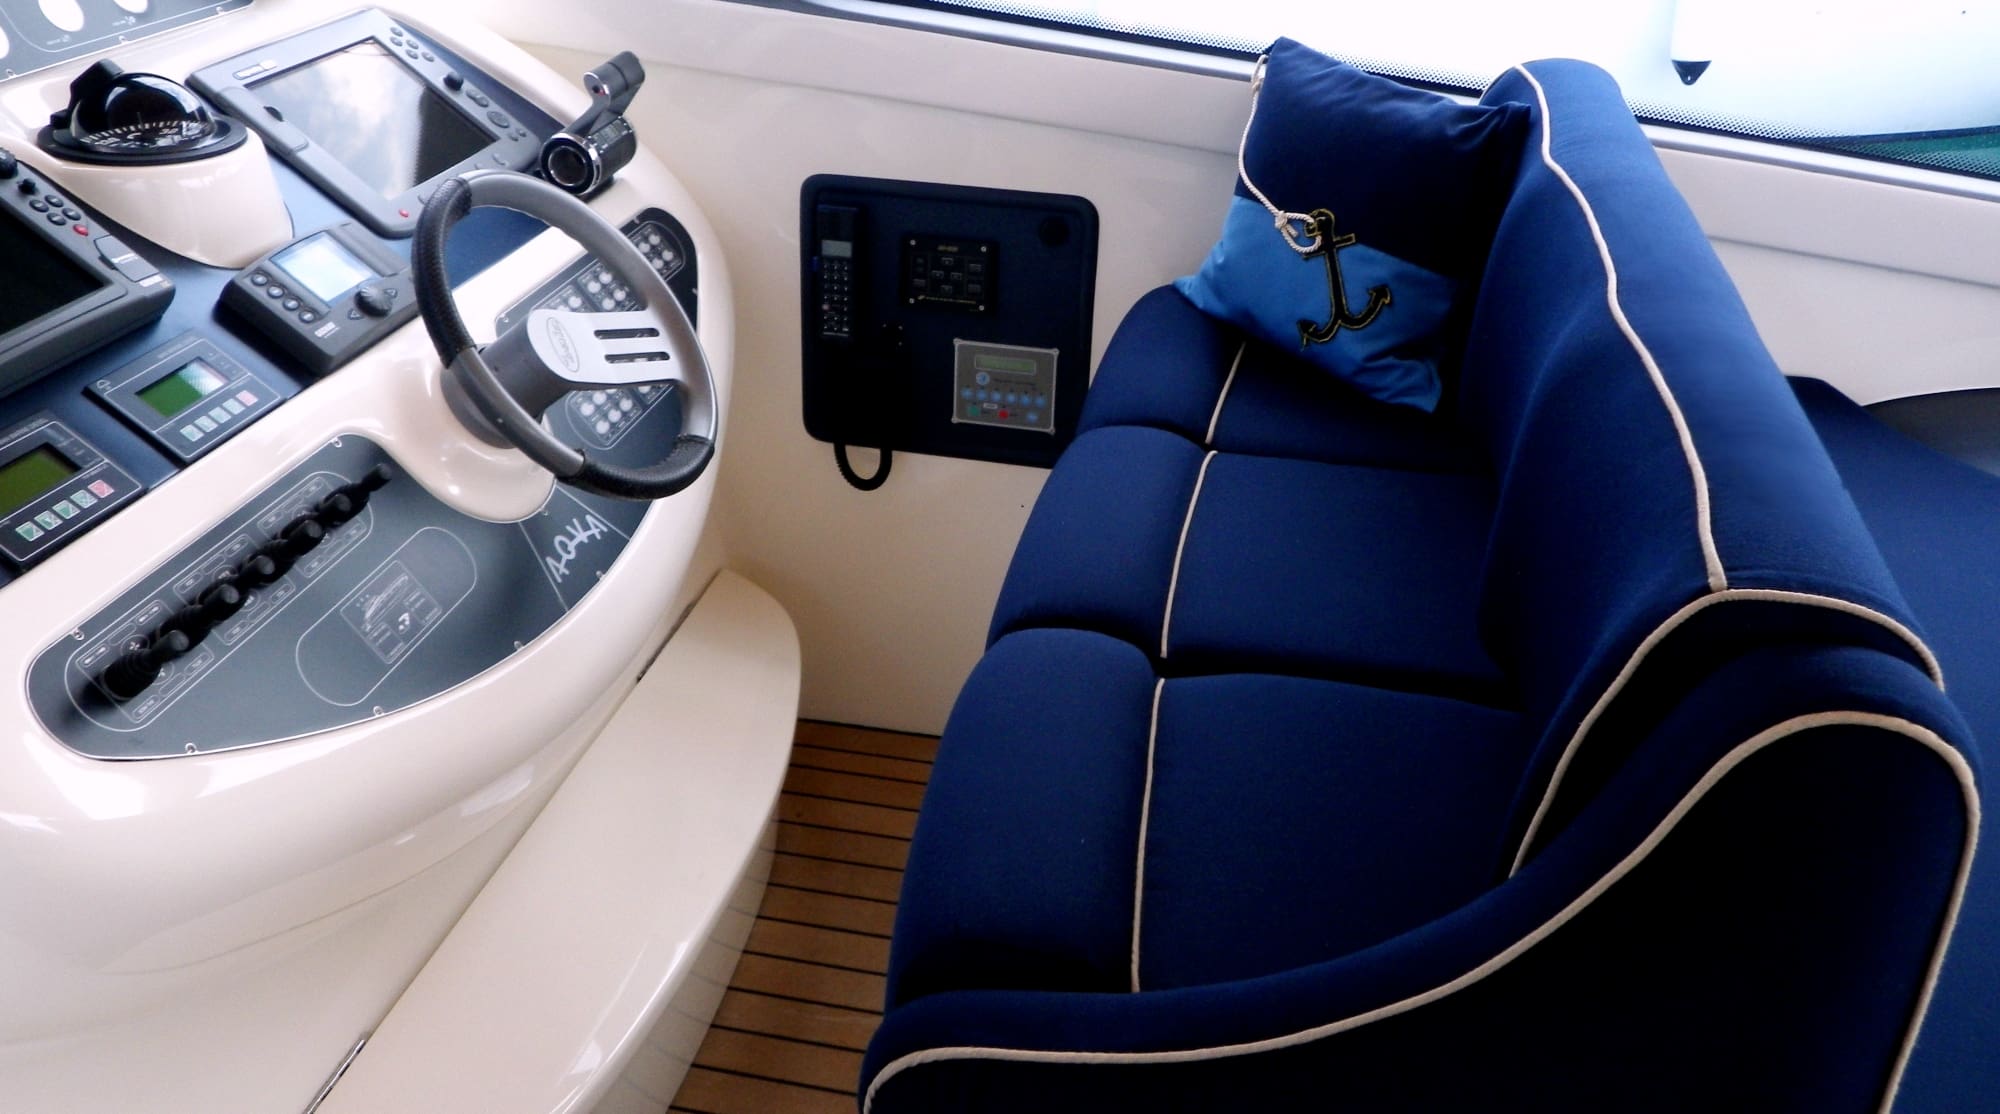 Royal blue colour yacht cushions with white piping highlighting the shape of the cushions for a luxurious look.